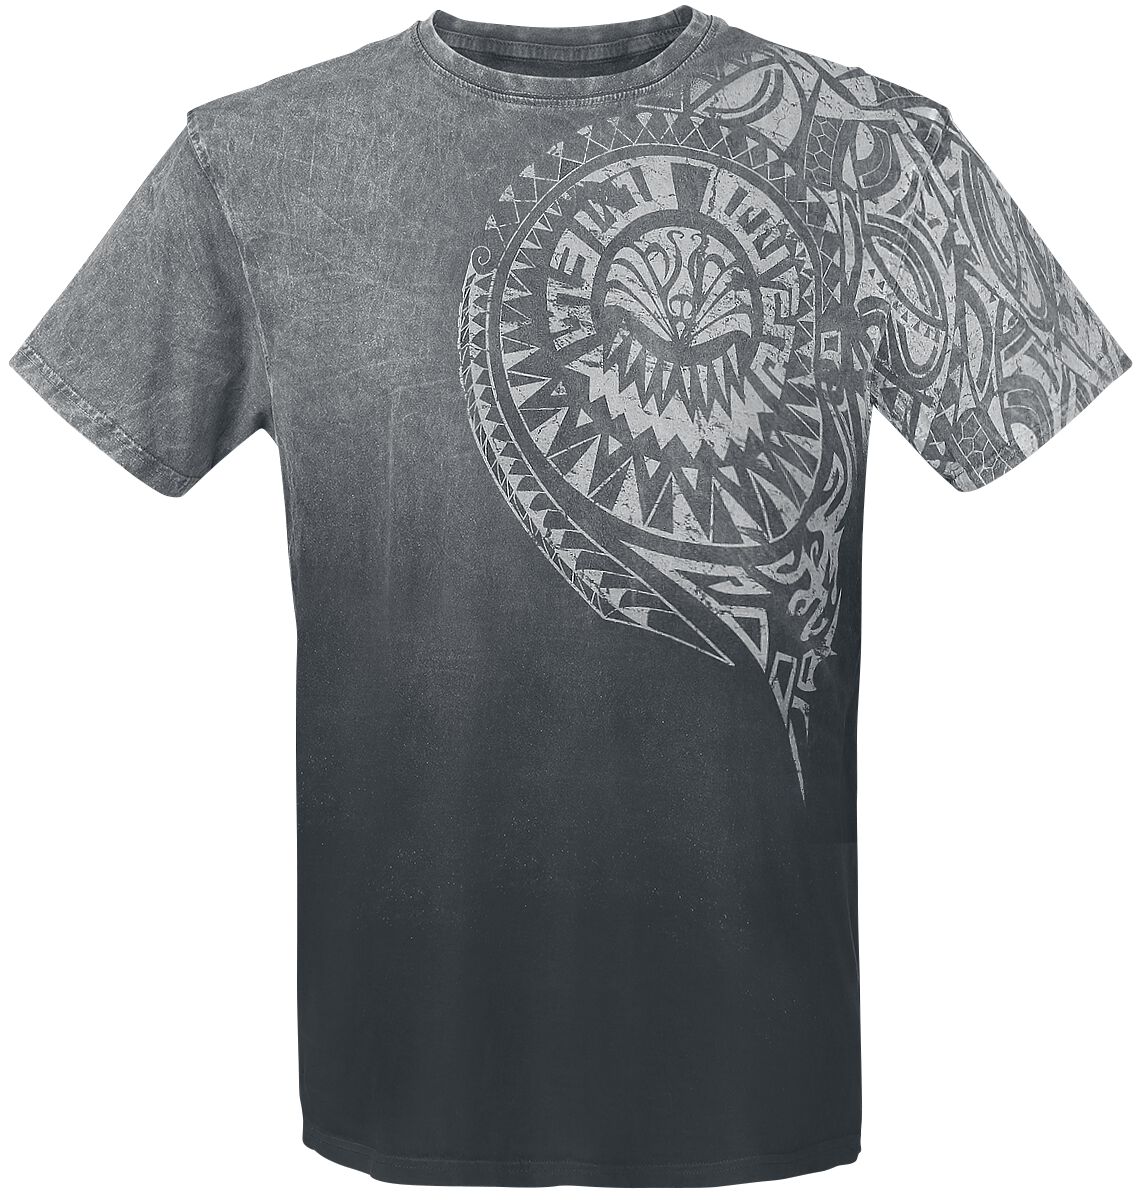 Outer Vision Burned Tattoo T-Shirt grau in M